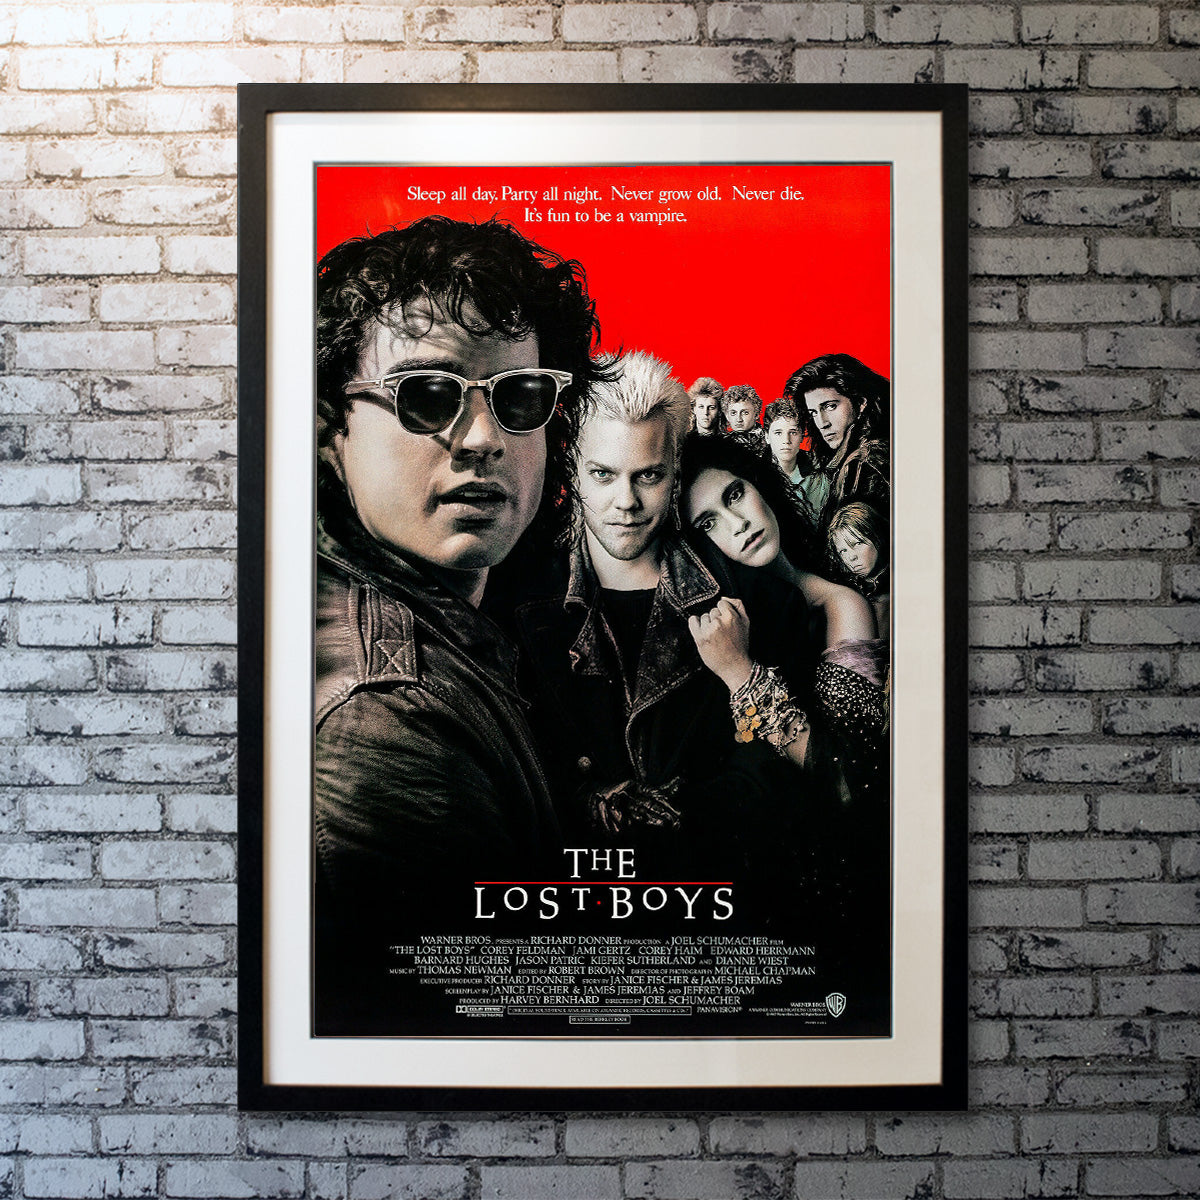 Lost Boys, The (1987)